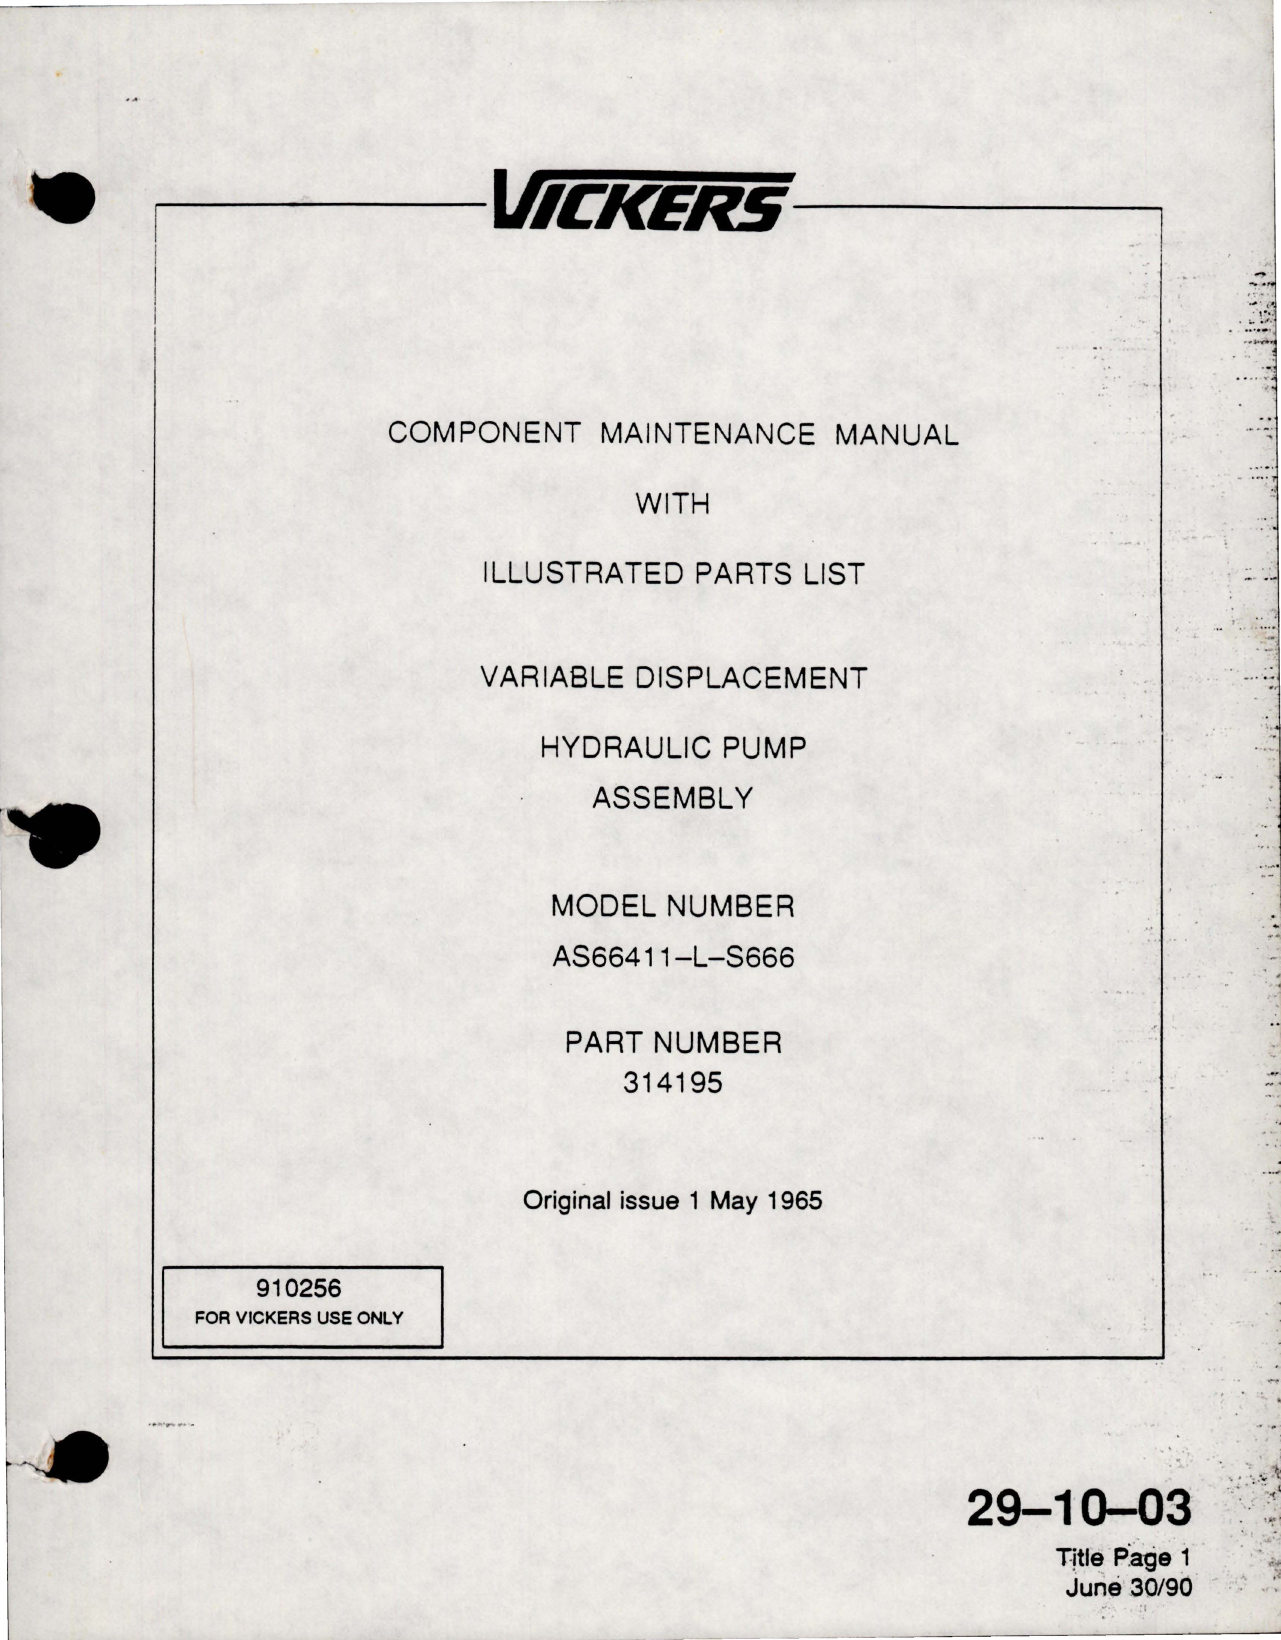 Sample page 1 from AirCorps Library document: Maintenance Manual with Parts List for Variable Displacement Hydraulic Pump Assembly - Model AS66411-L-S666 - Part 314195